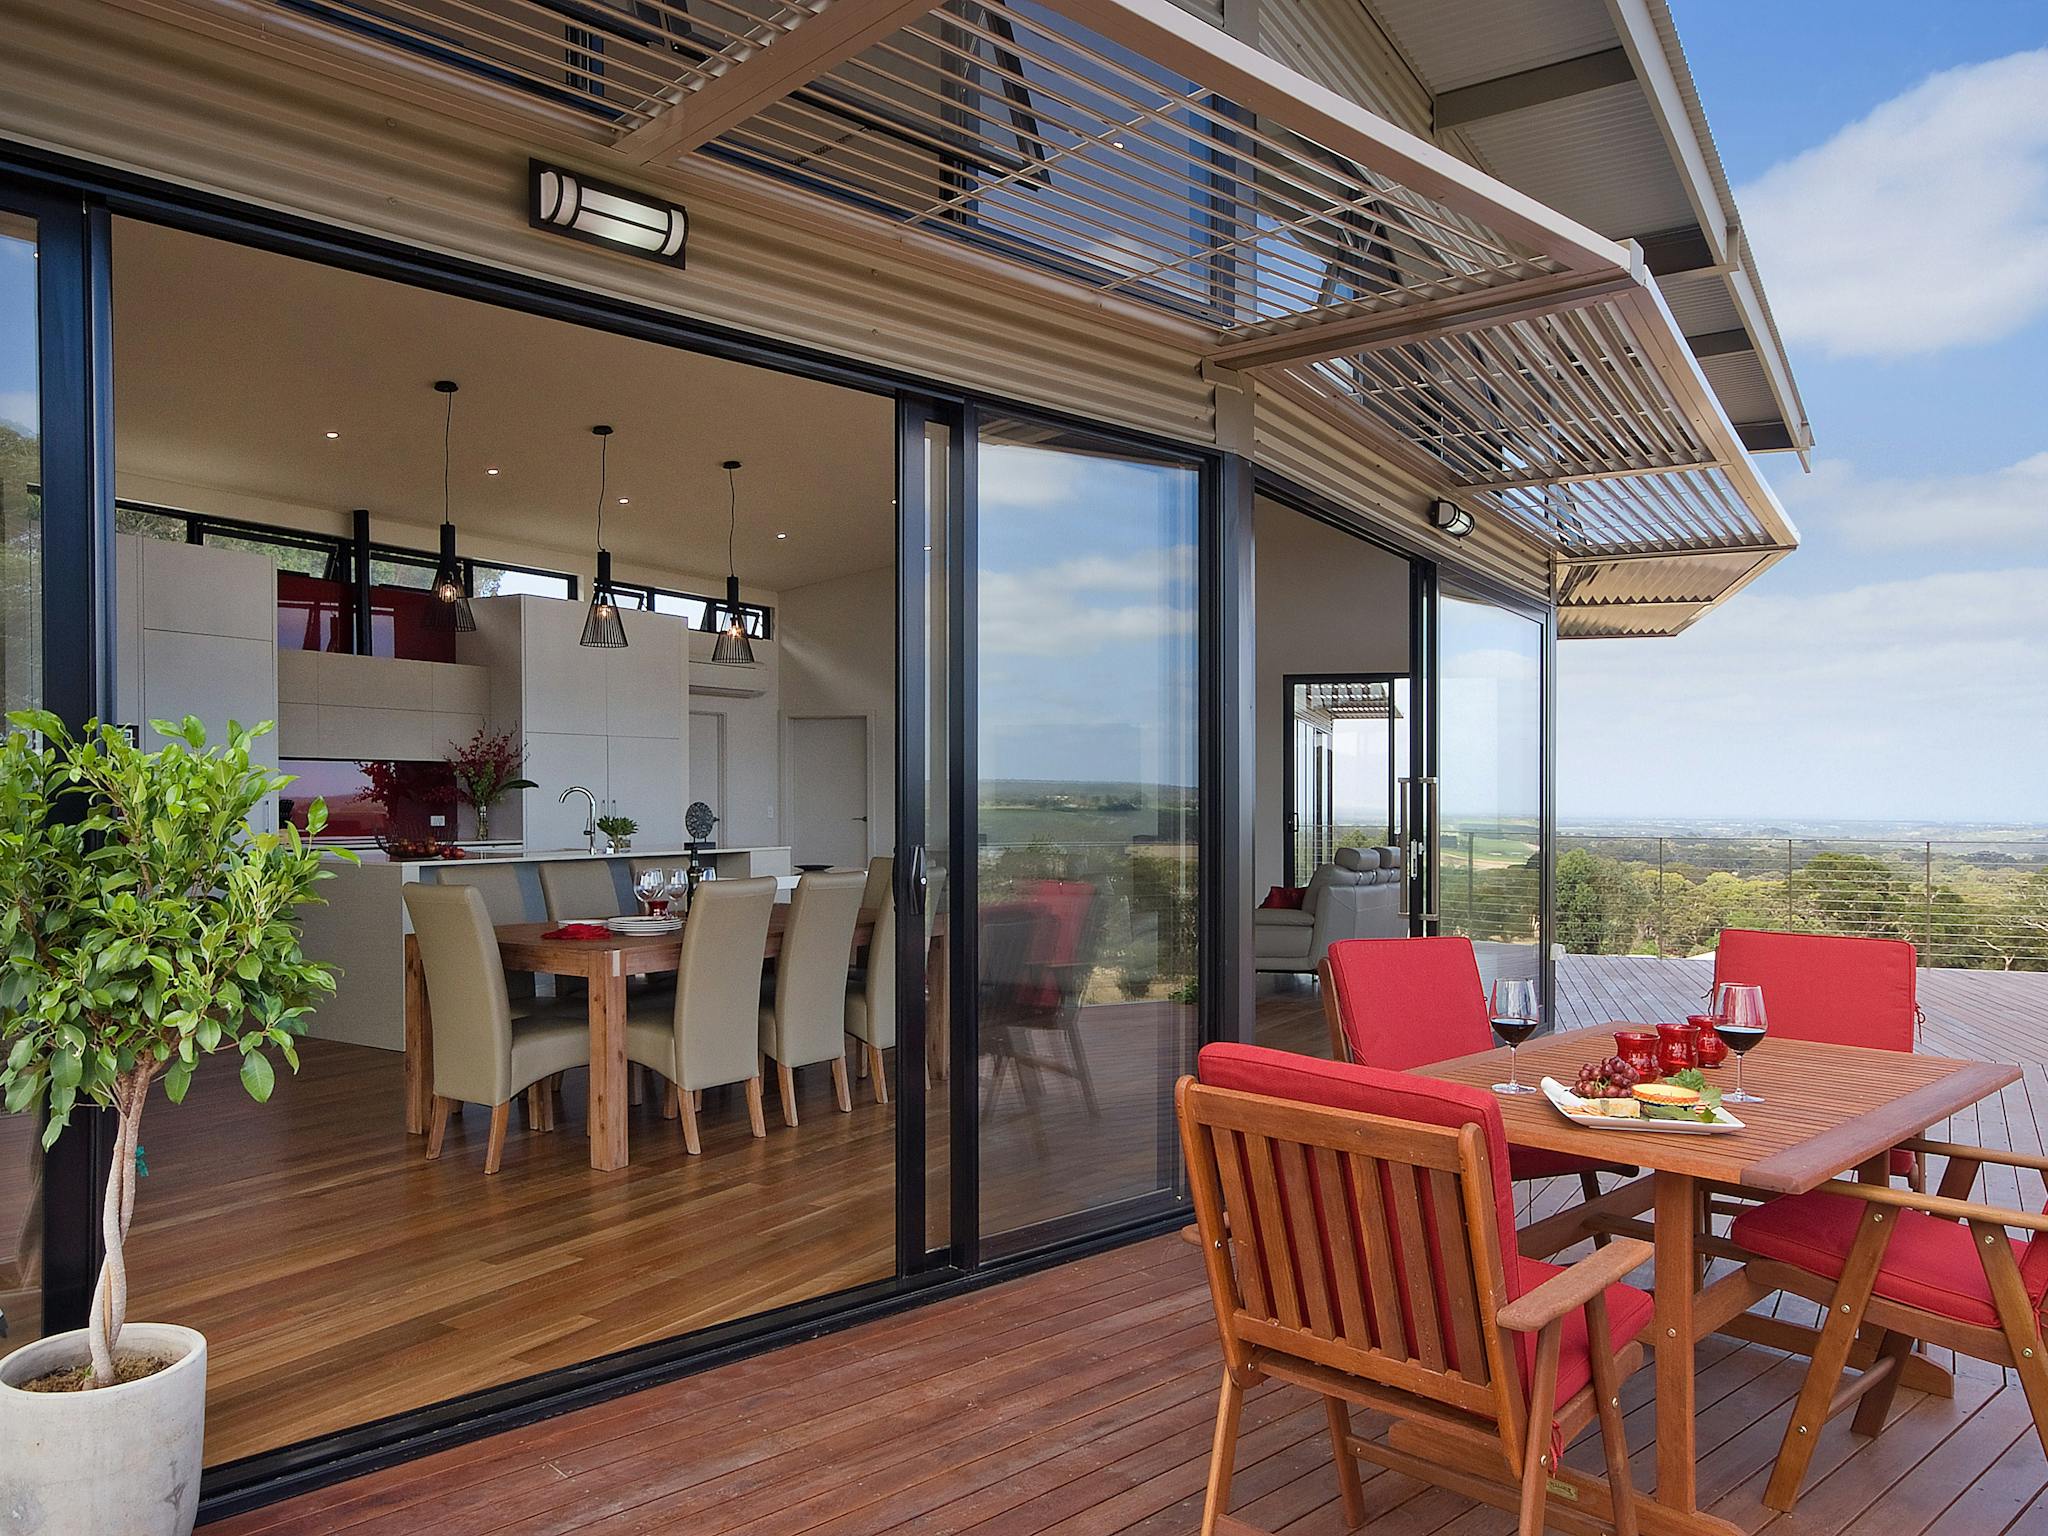 Ceiling to floor double glazed glass affords the views no matter what the weather brings!